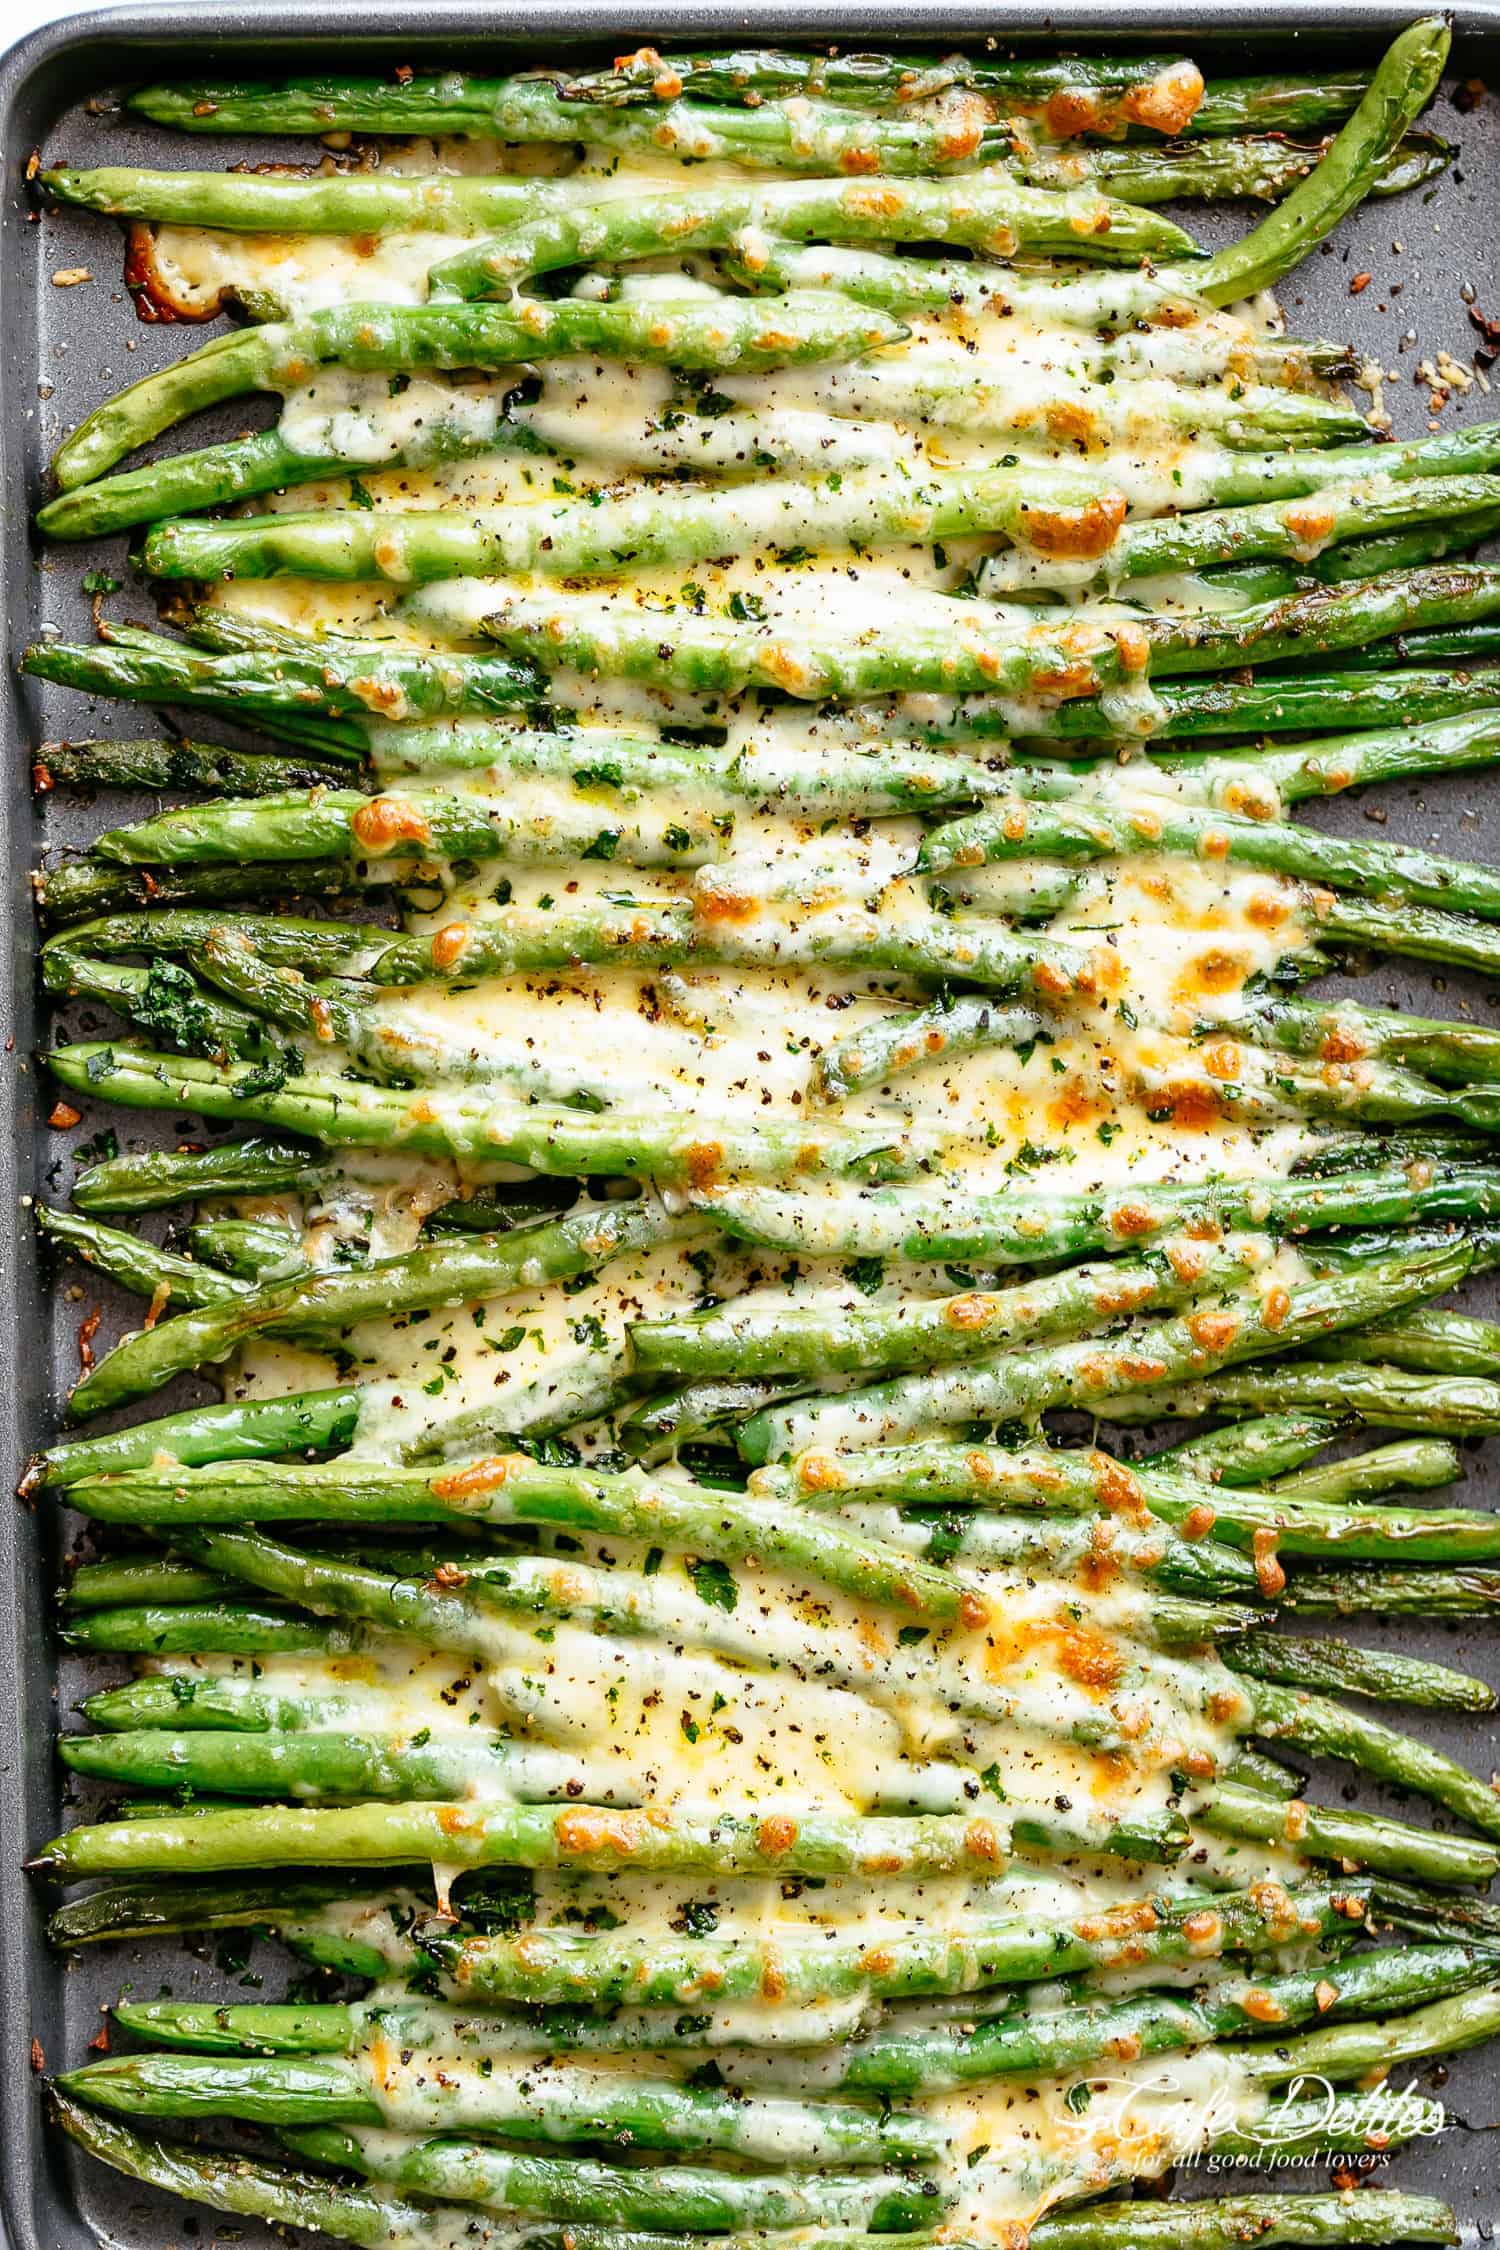 A tray of roasted green beans with melted cheese